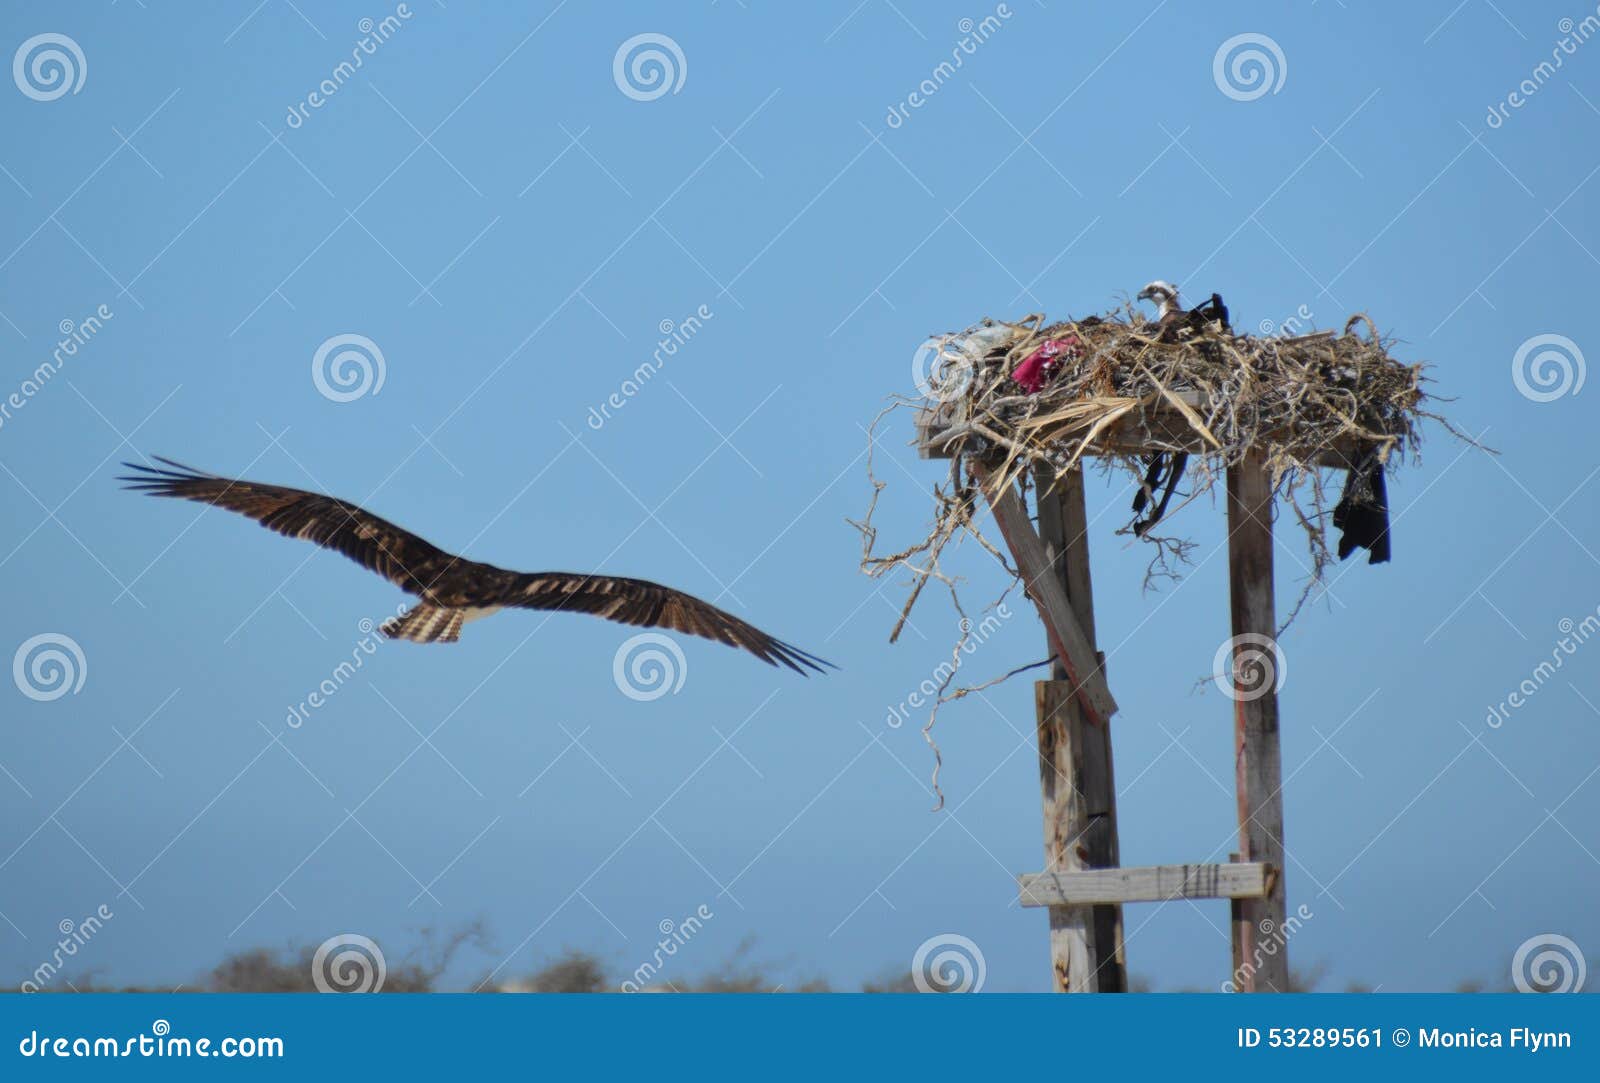 osprey flying to the nest in guerro negro in baja california del sur, mexico